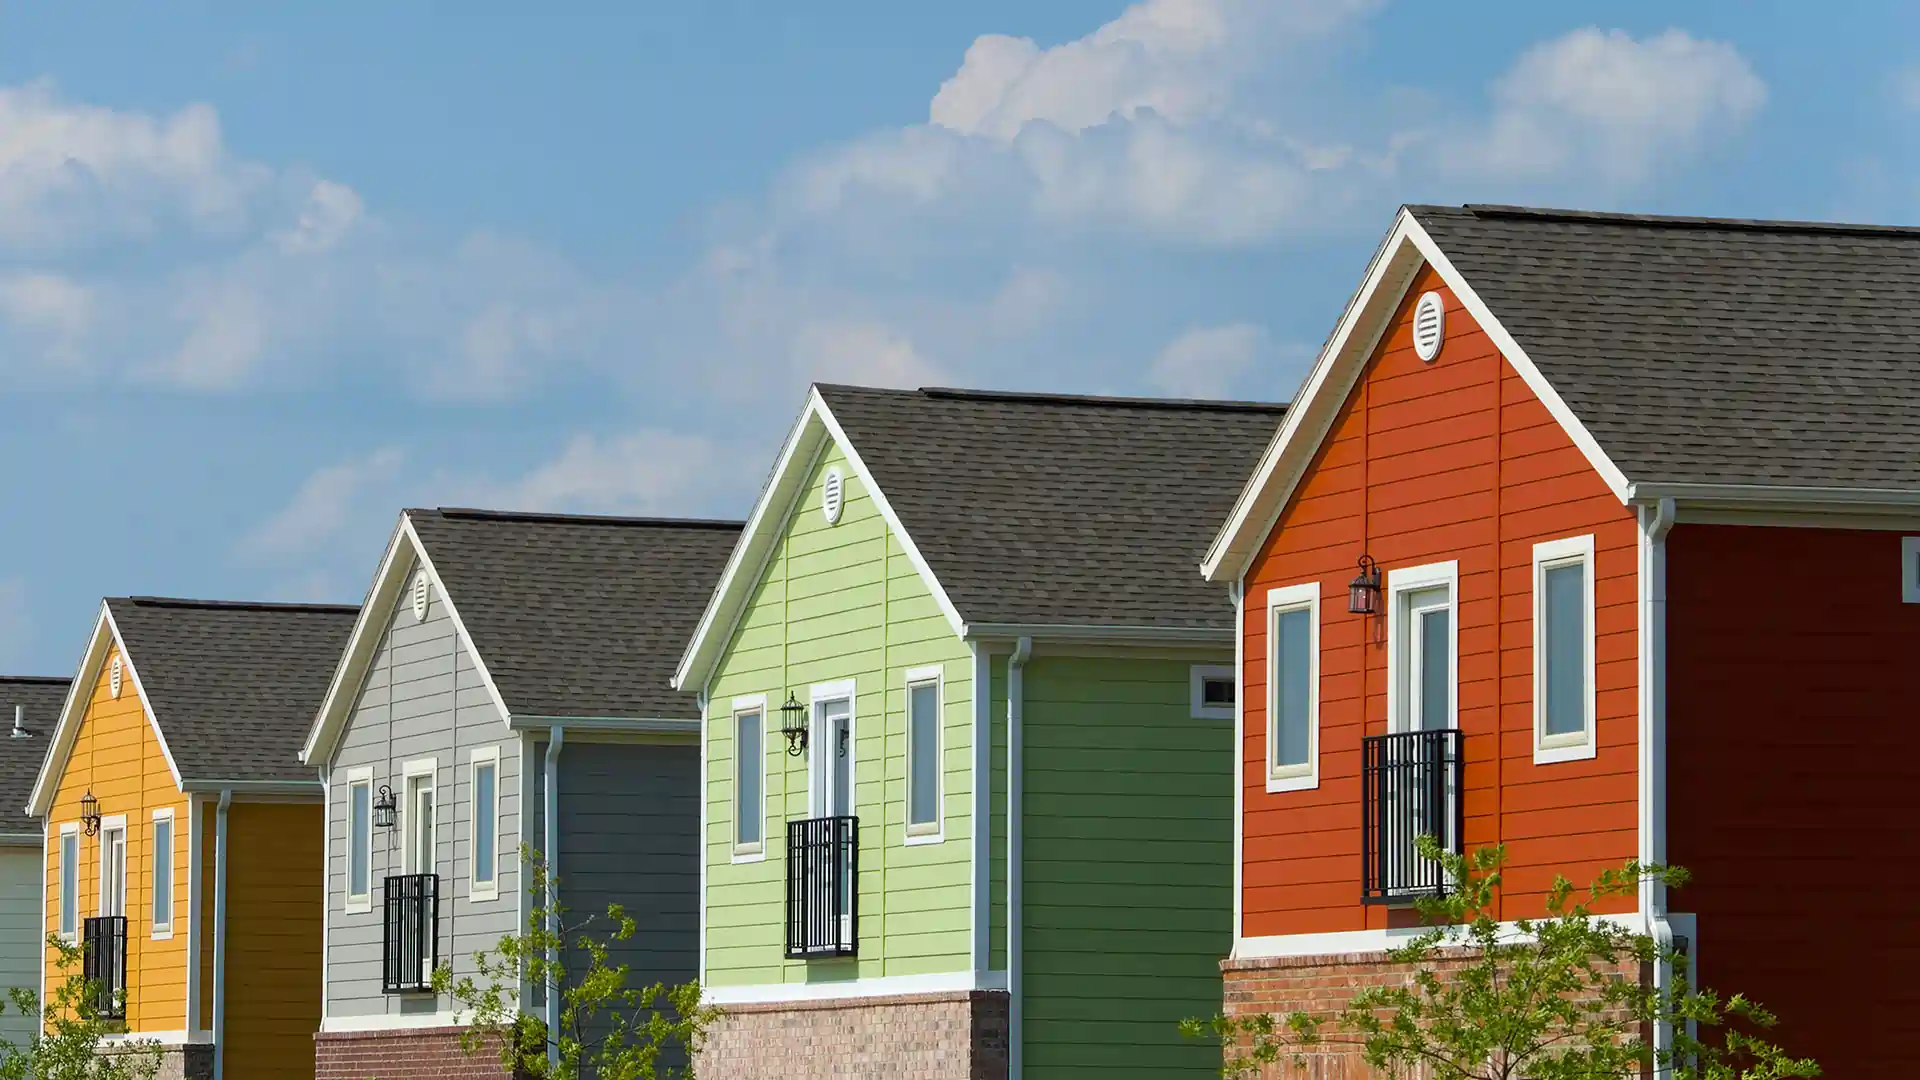 Four colorful houses in a row against a blue sky.